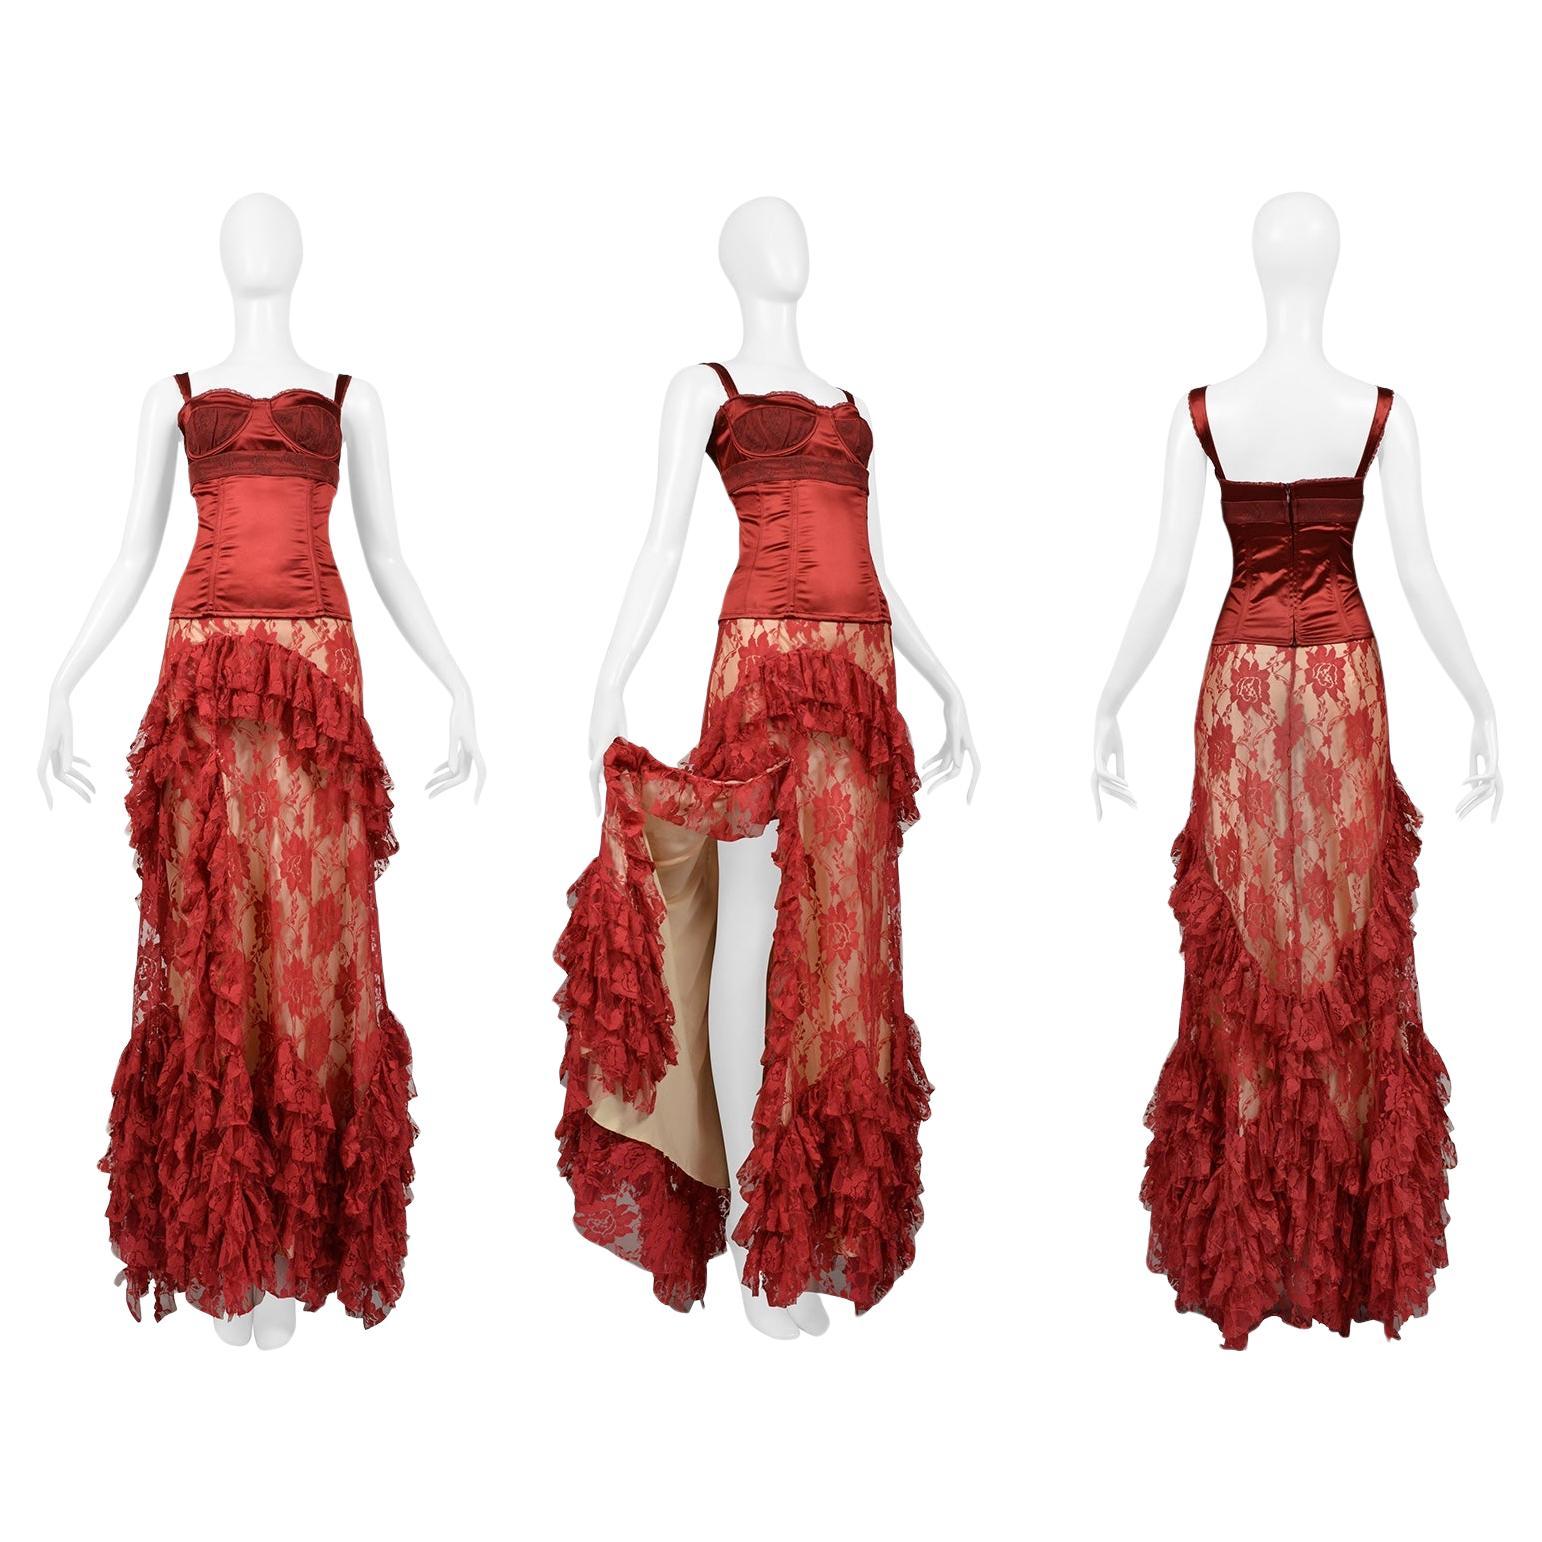 Resurrection Vintage is delighted to offer a romantic vintage John Galliano red evening ensemble featuring a dramatic ballgown length skirt with a high slit, lace ruffle layers, solid off-white lining, an invisible zipper at the back, and metal